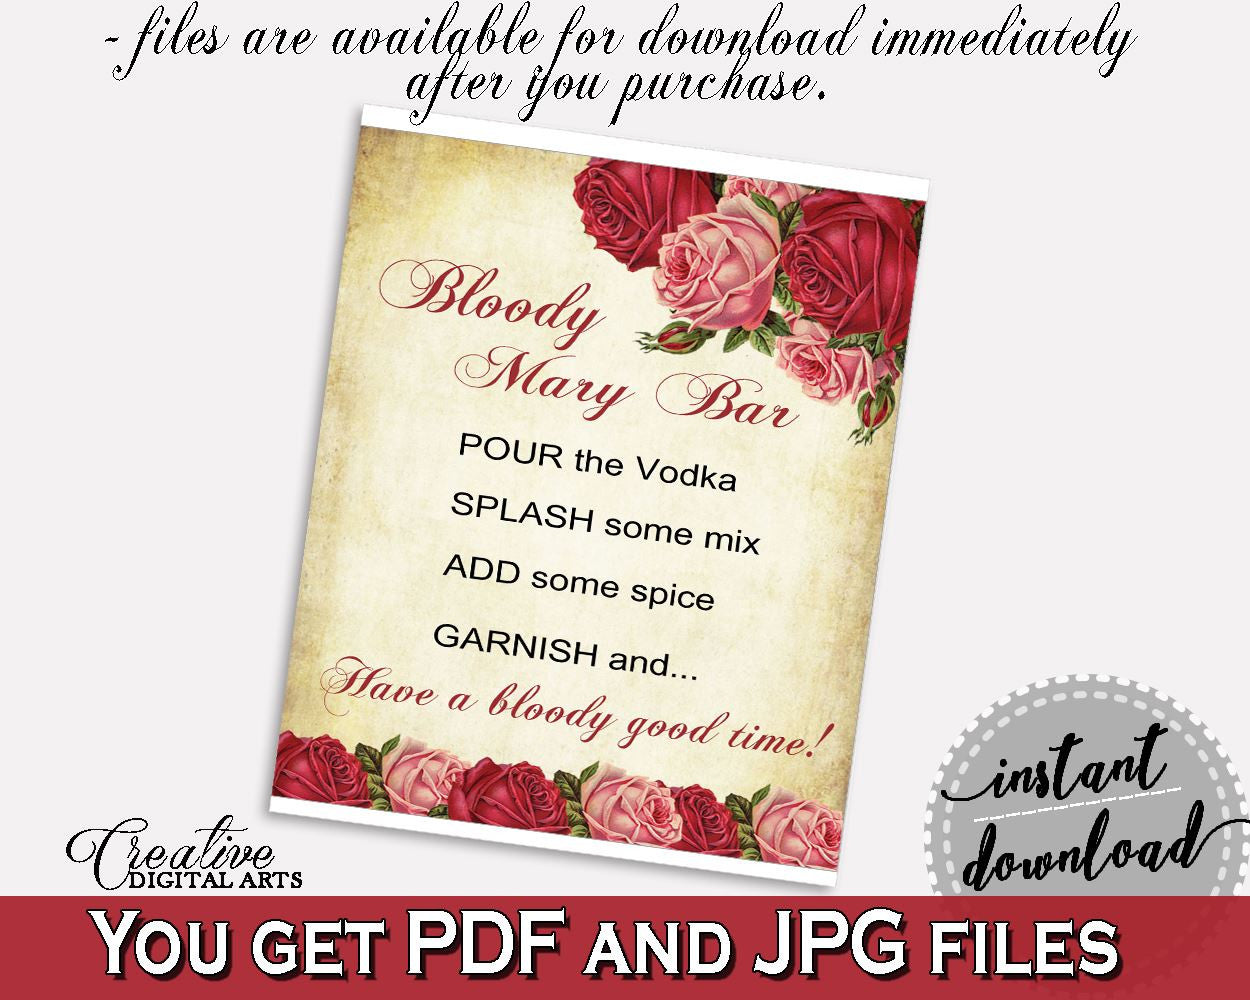 Bloody Mary Bridal Shower Bloody Mary Vintage Bridal Shower Bloody Mary Bridal Shower Vintage Bloody Mary Red Pink party décor XBJK2 - Digital Product